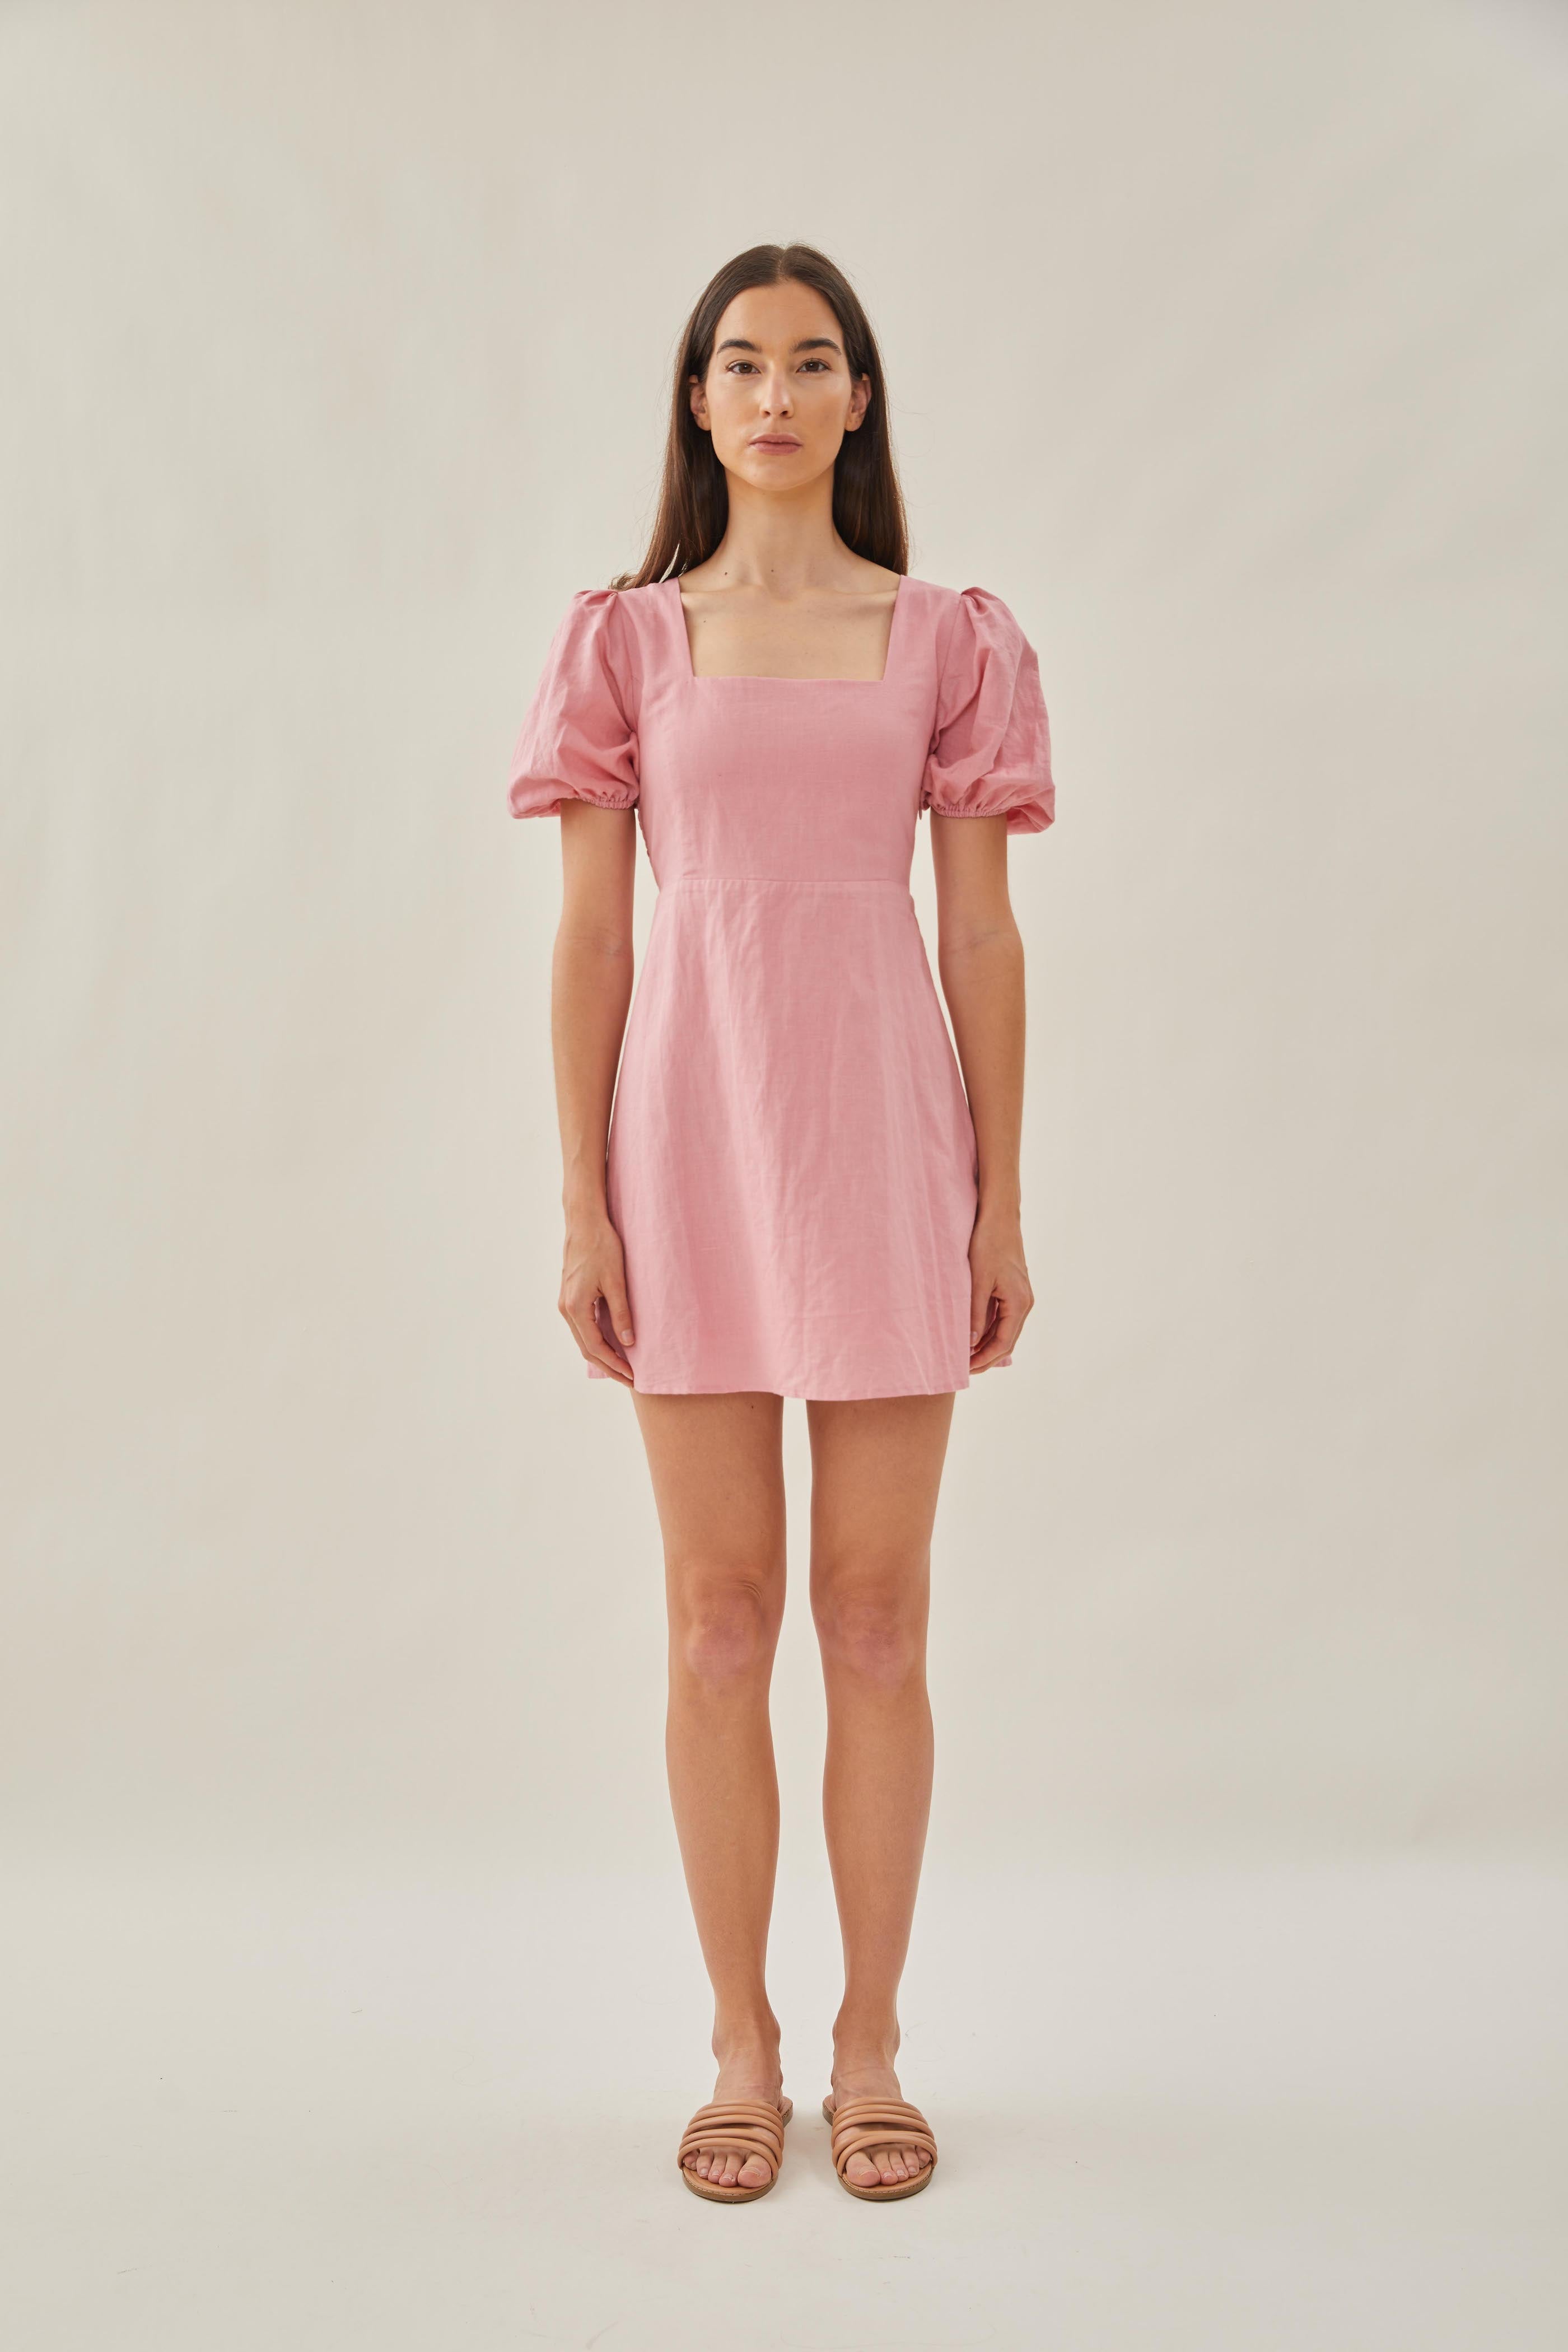 Square Neck Sleeved Mini Dress in Pink